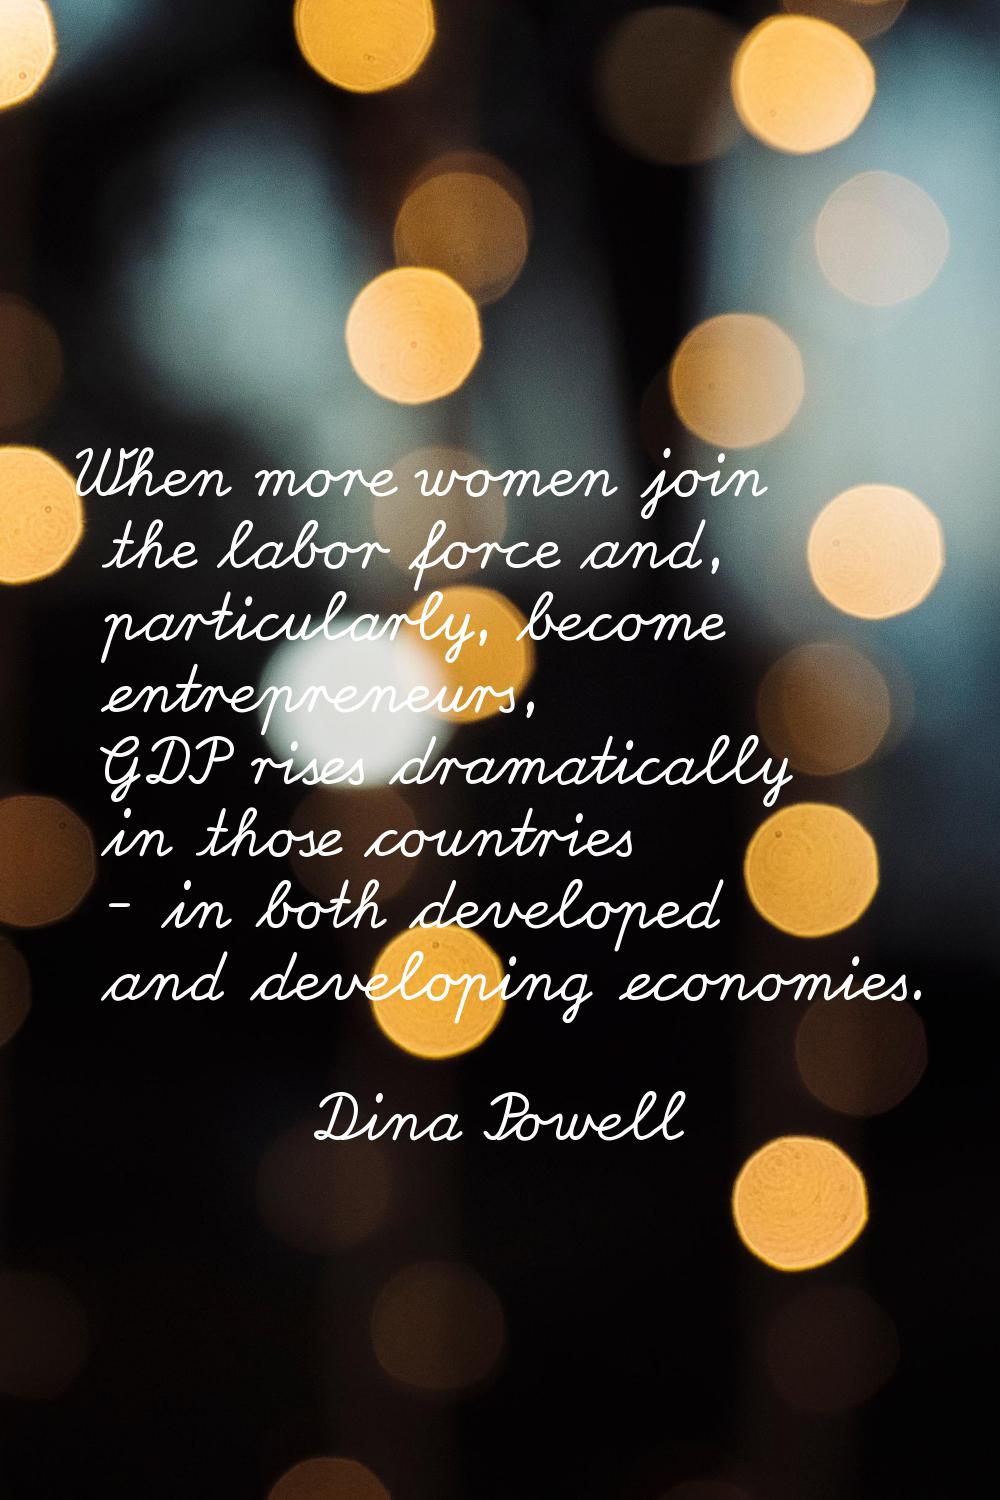 When more women join the labor force and, particularly, become entrepreneurs, GDP rises dramaticall